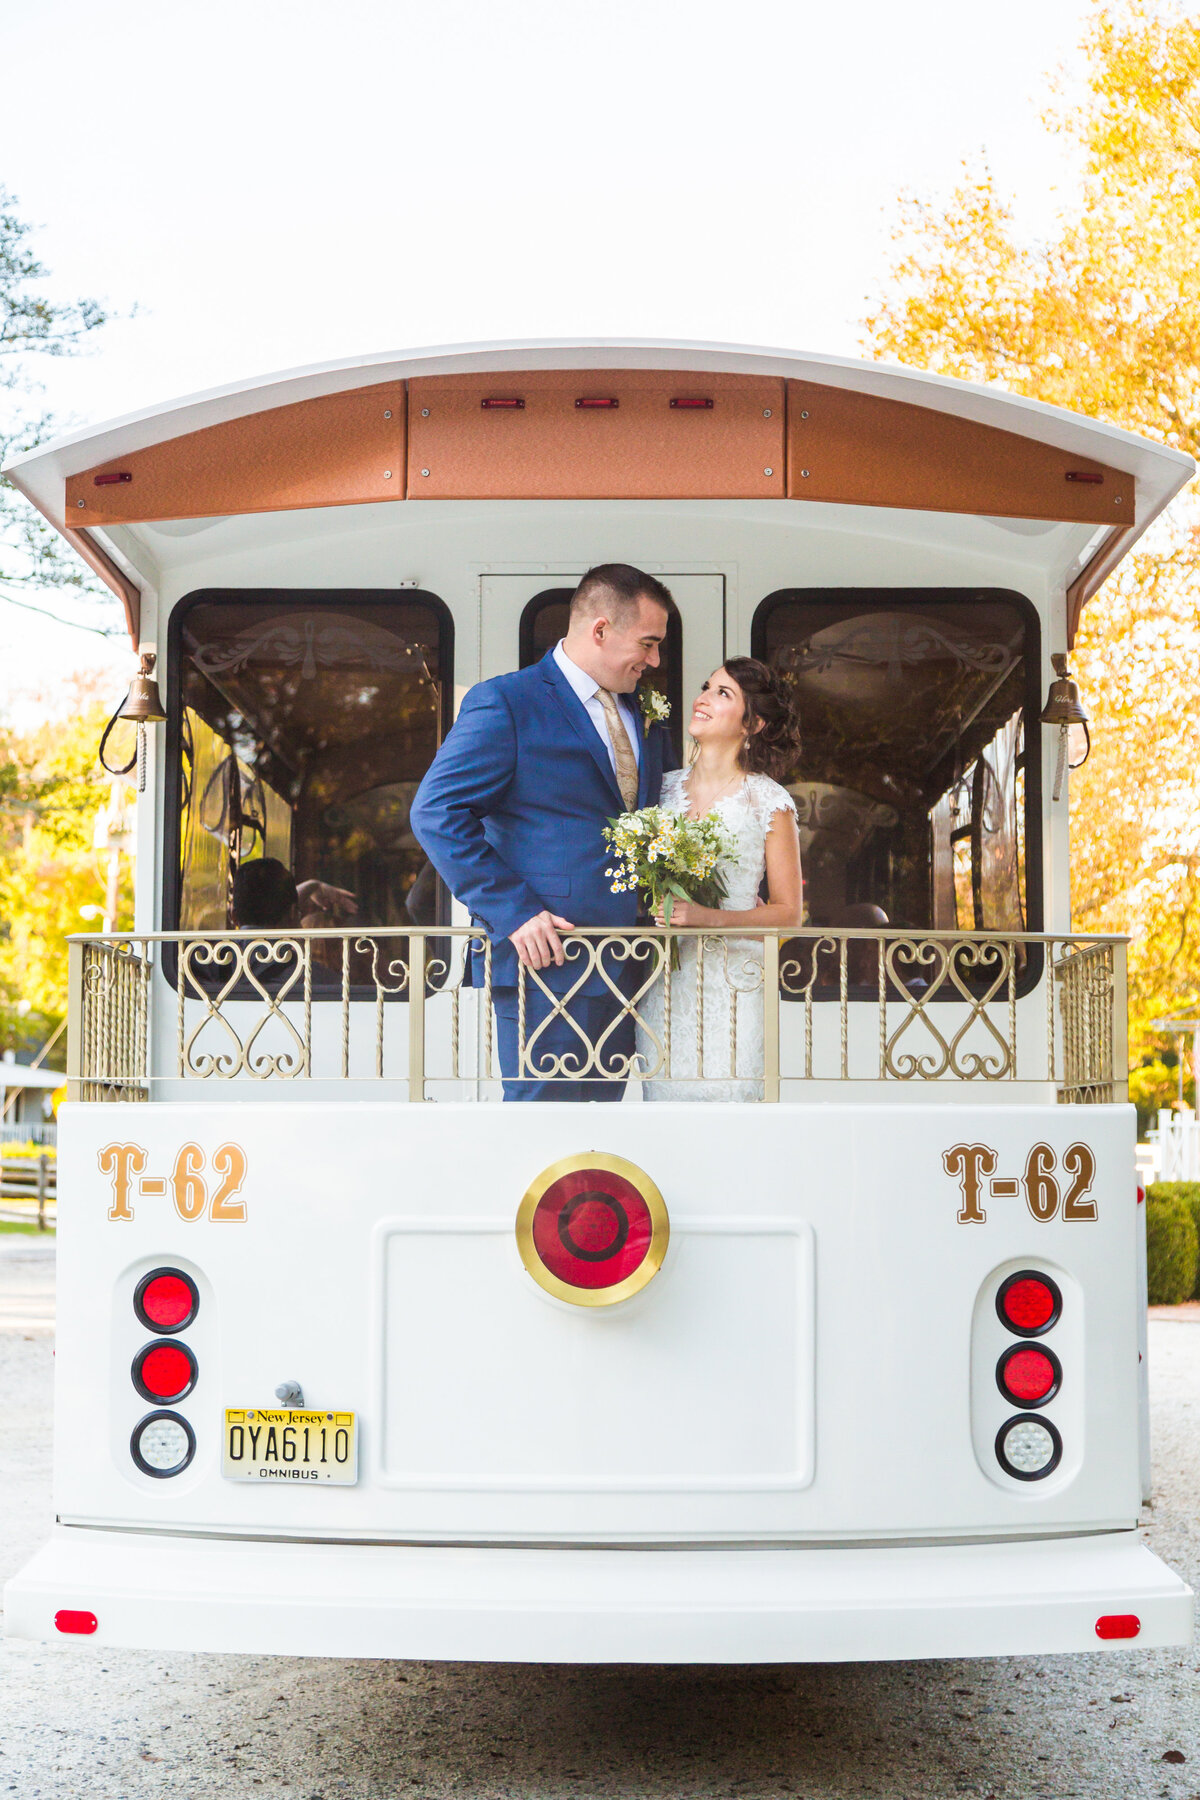 Cape May Wedding Trolley by Florida wedding photographer Michelle Coombs